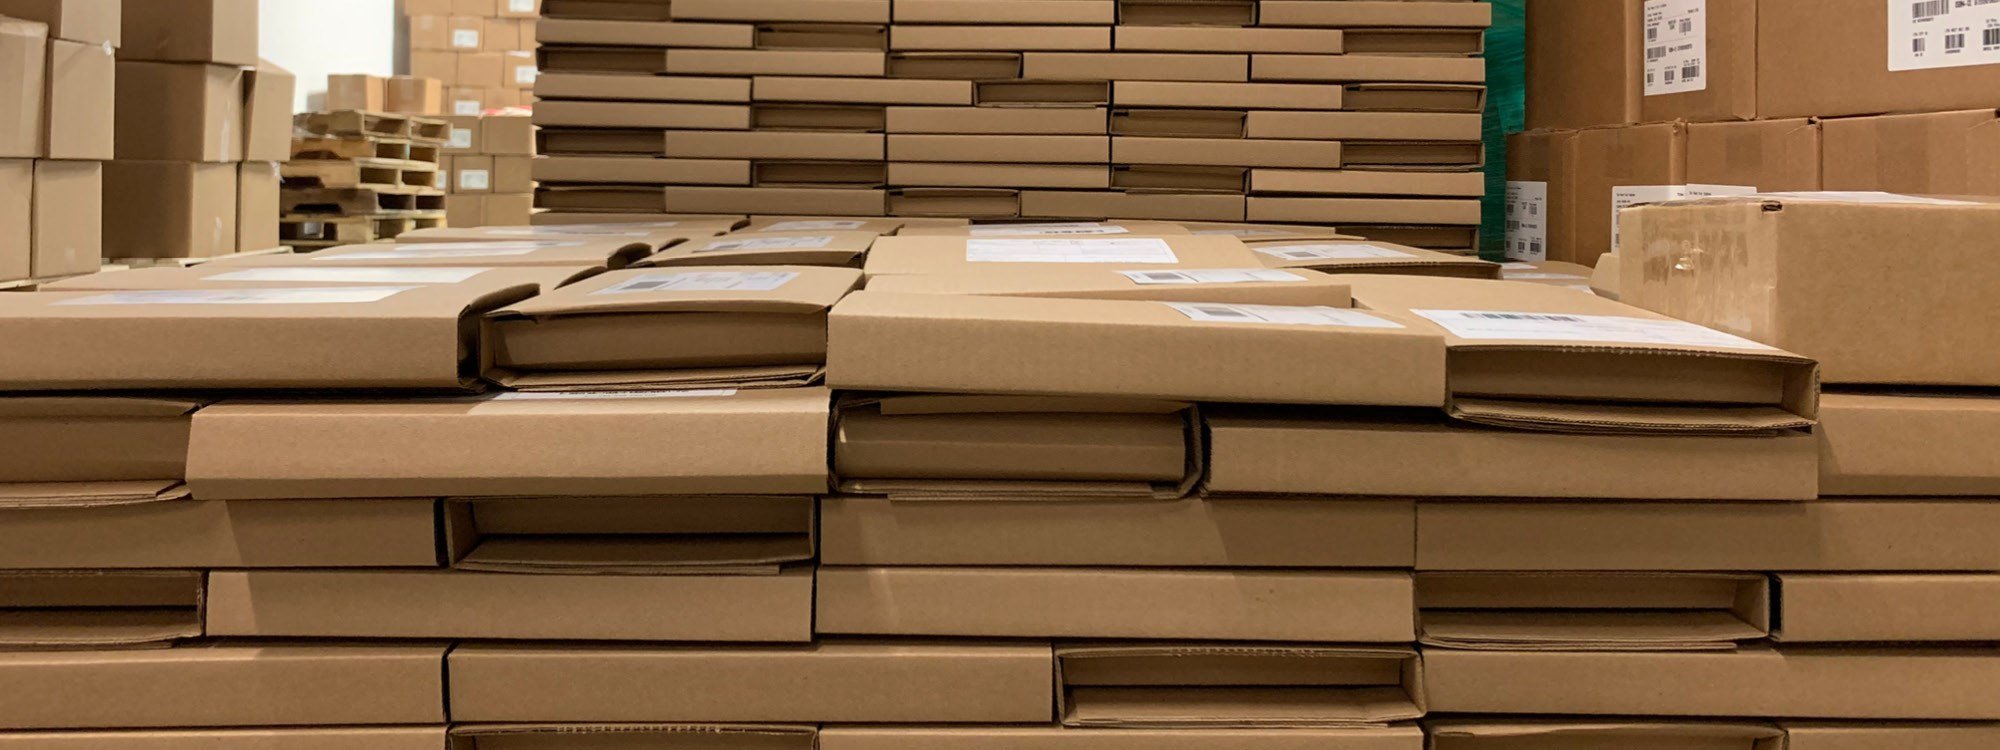 How to Safely Package and Ship Books